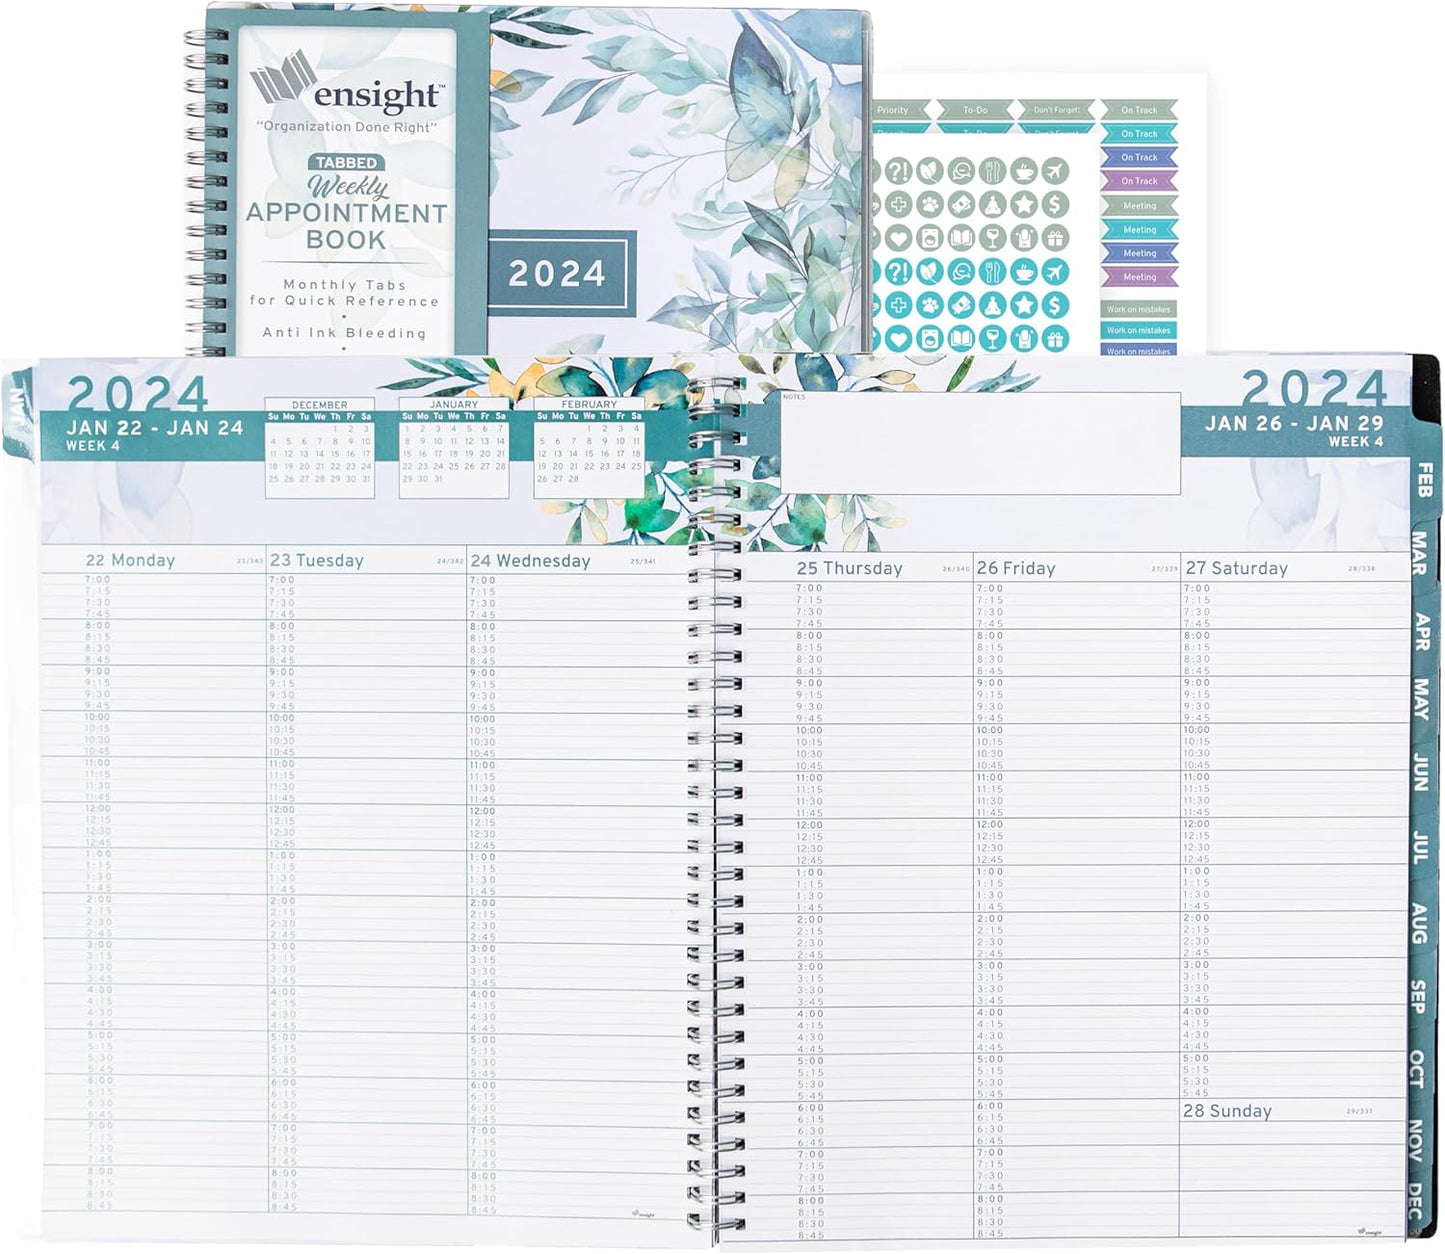 2024 Ensight Tabbed Appointment Book & Planner